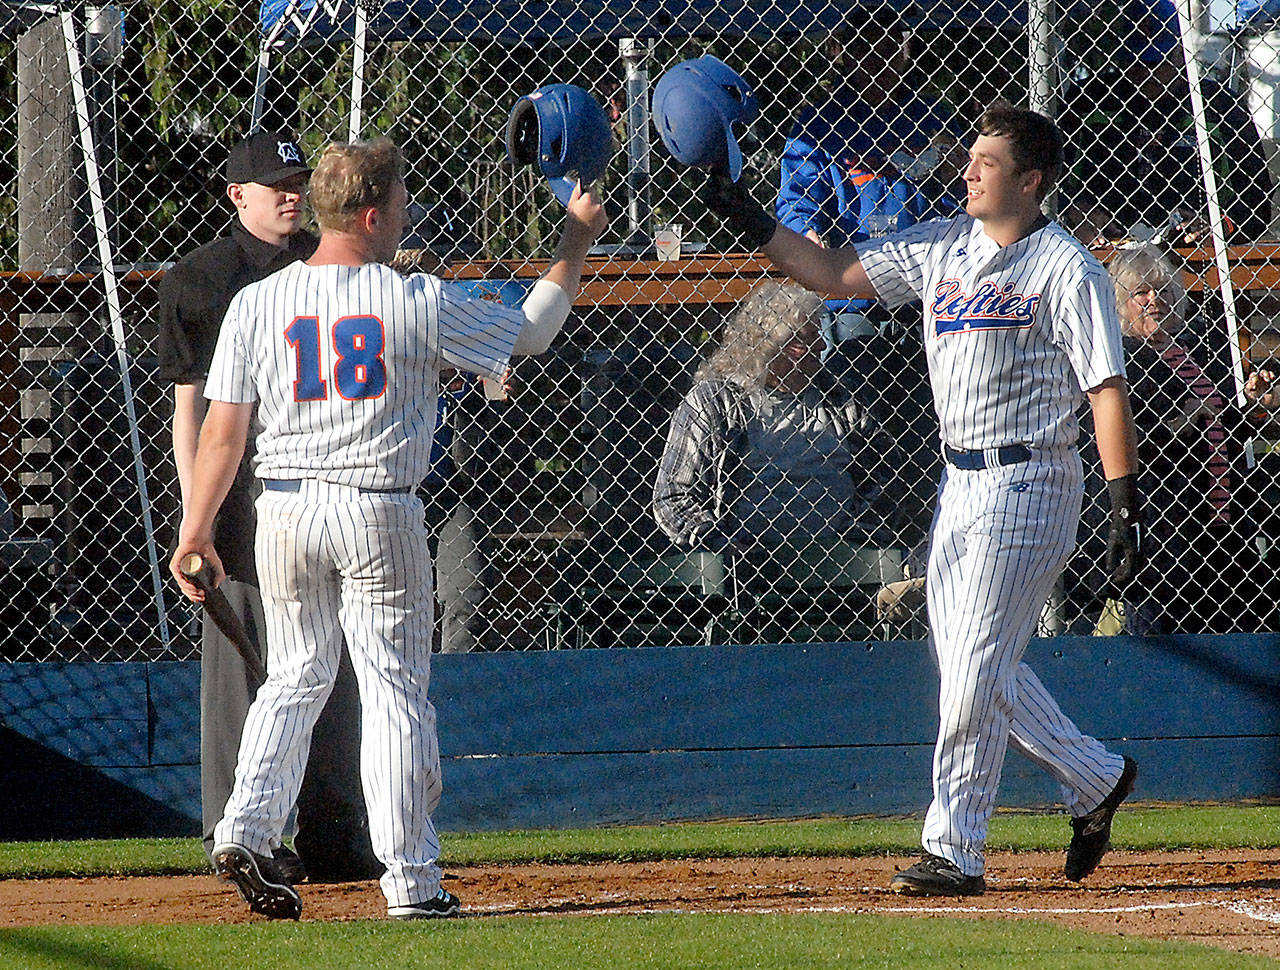 Lefties third baseman Evan Hurn, right, is greeted by fellow baserunner Alexander Marco at home plate after Hurn’s two-run homer in the second inning at Port Angeles’ Civic Field on June 7. Photo by Keith Thorpe/Peninsula Daily News